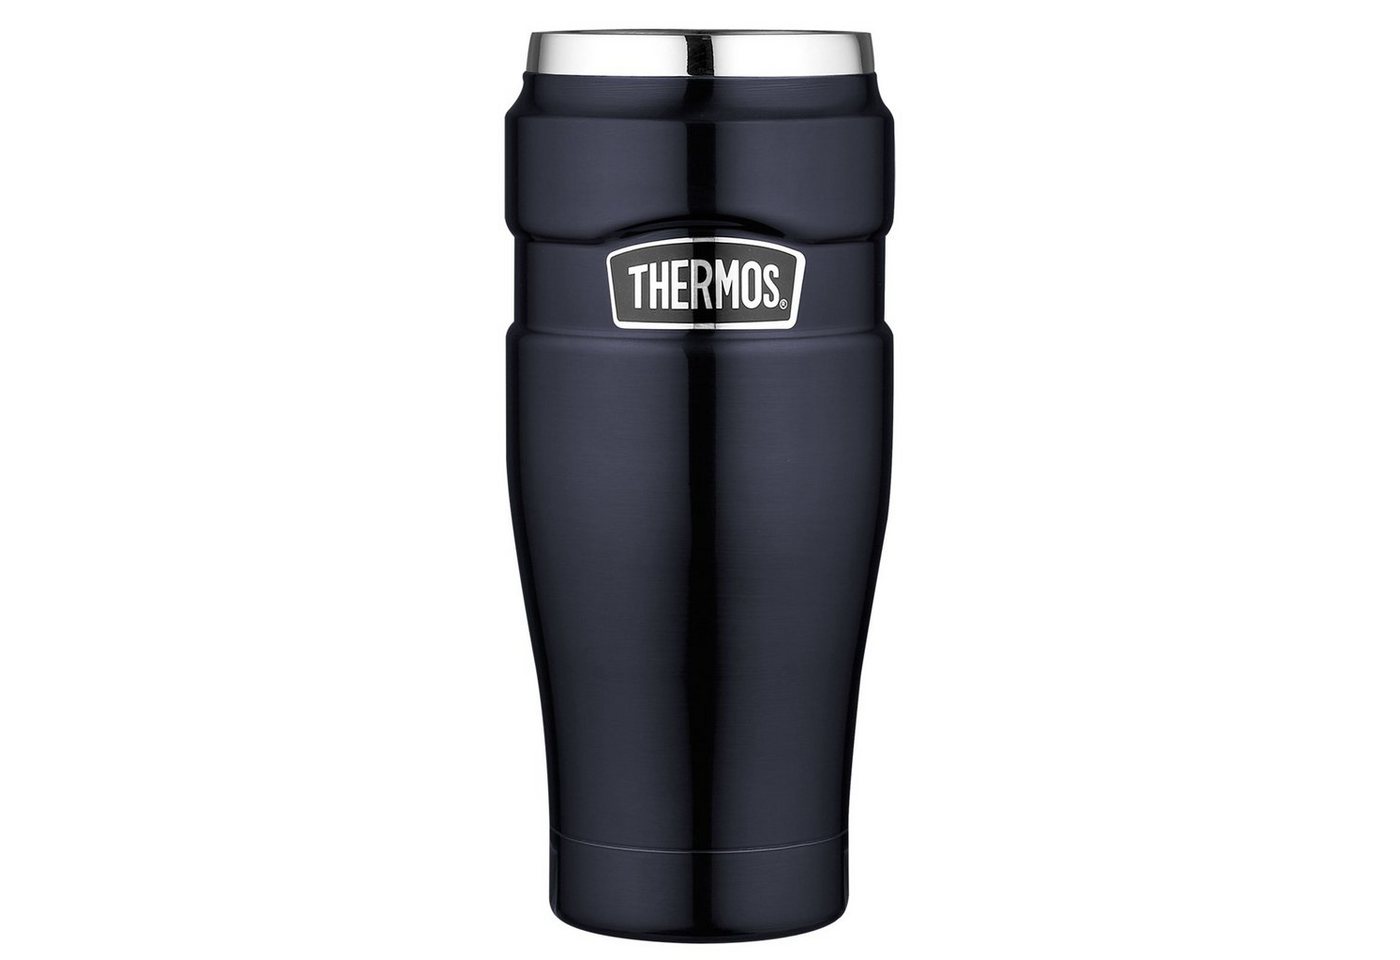 THERMOS Thermobecher Becher 0,47L Isolierbecher KFZ, Edelstahl, Auto Kaffee Camping Thermo Trinkbecher Edelstahl von THERMOS